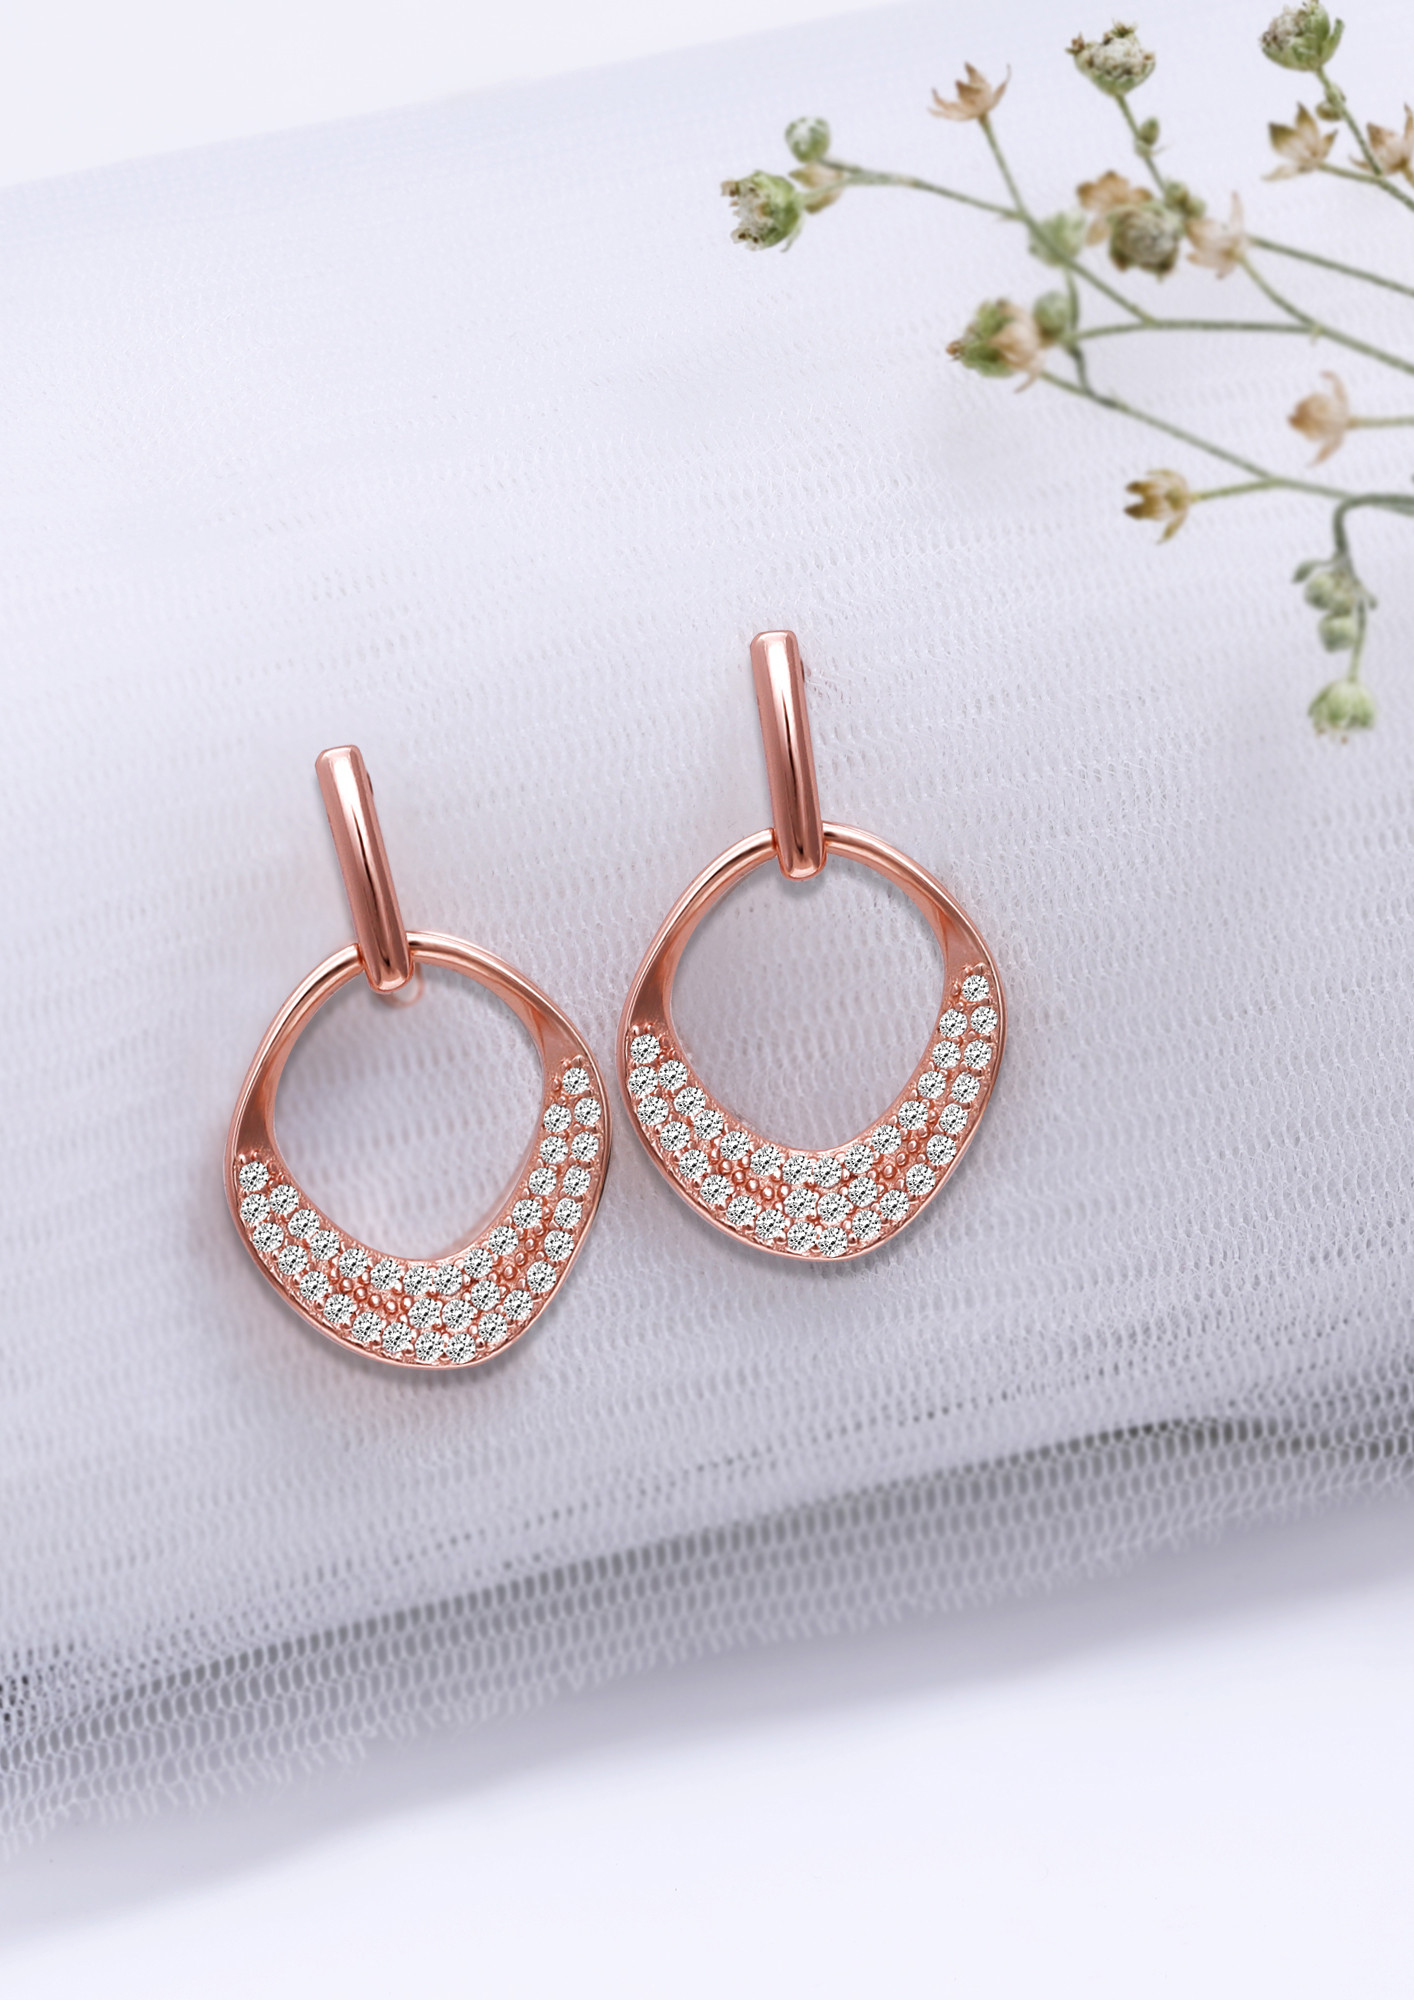 75 Carat (each) Brilliant CZ Round Stud Earrings in Rose Gold Overlay-sgquangbinhtourist.com.vn